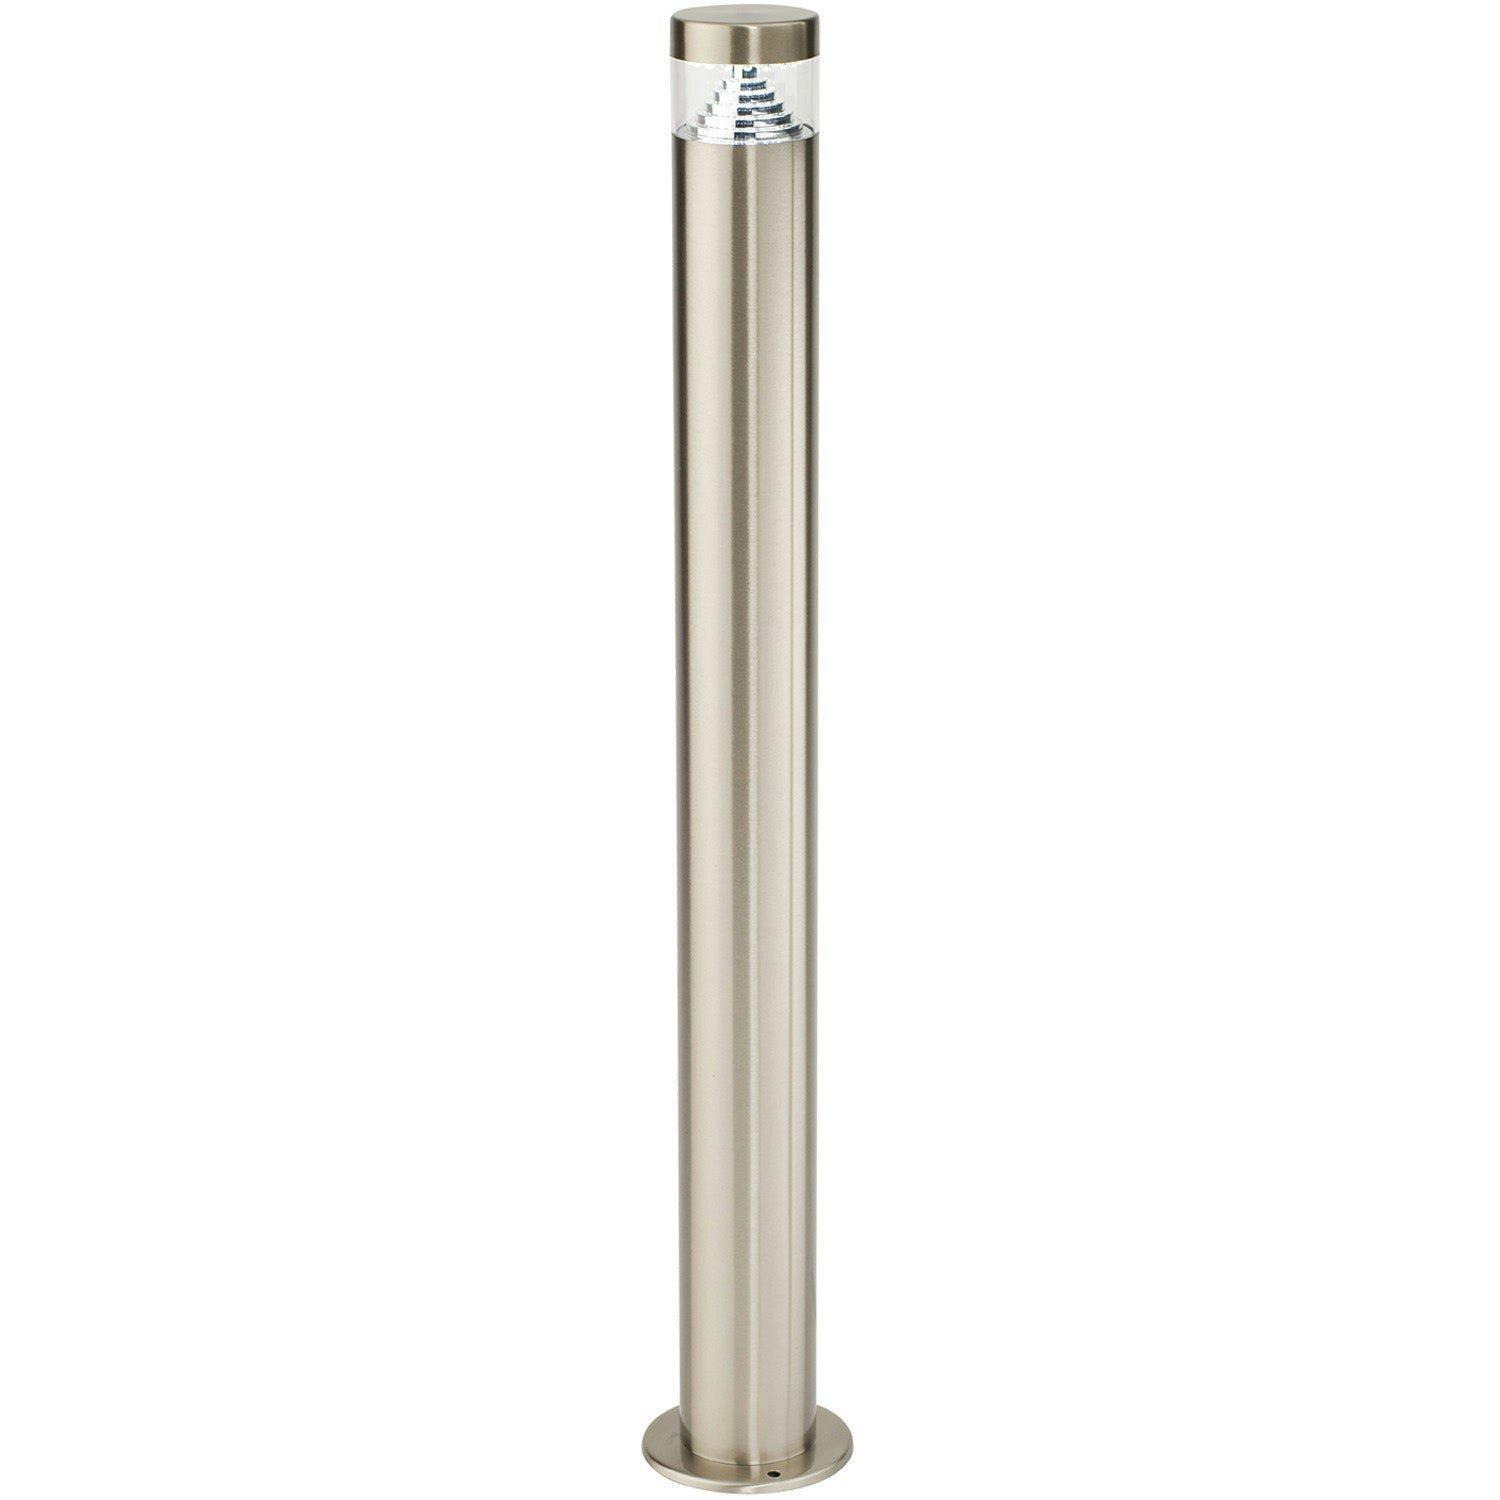 Stepped Outdoor Bollard Light - 3.3W LED Module - 800mm Height - Stainless Steel - image 1